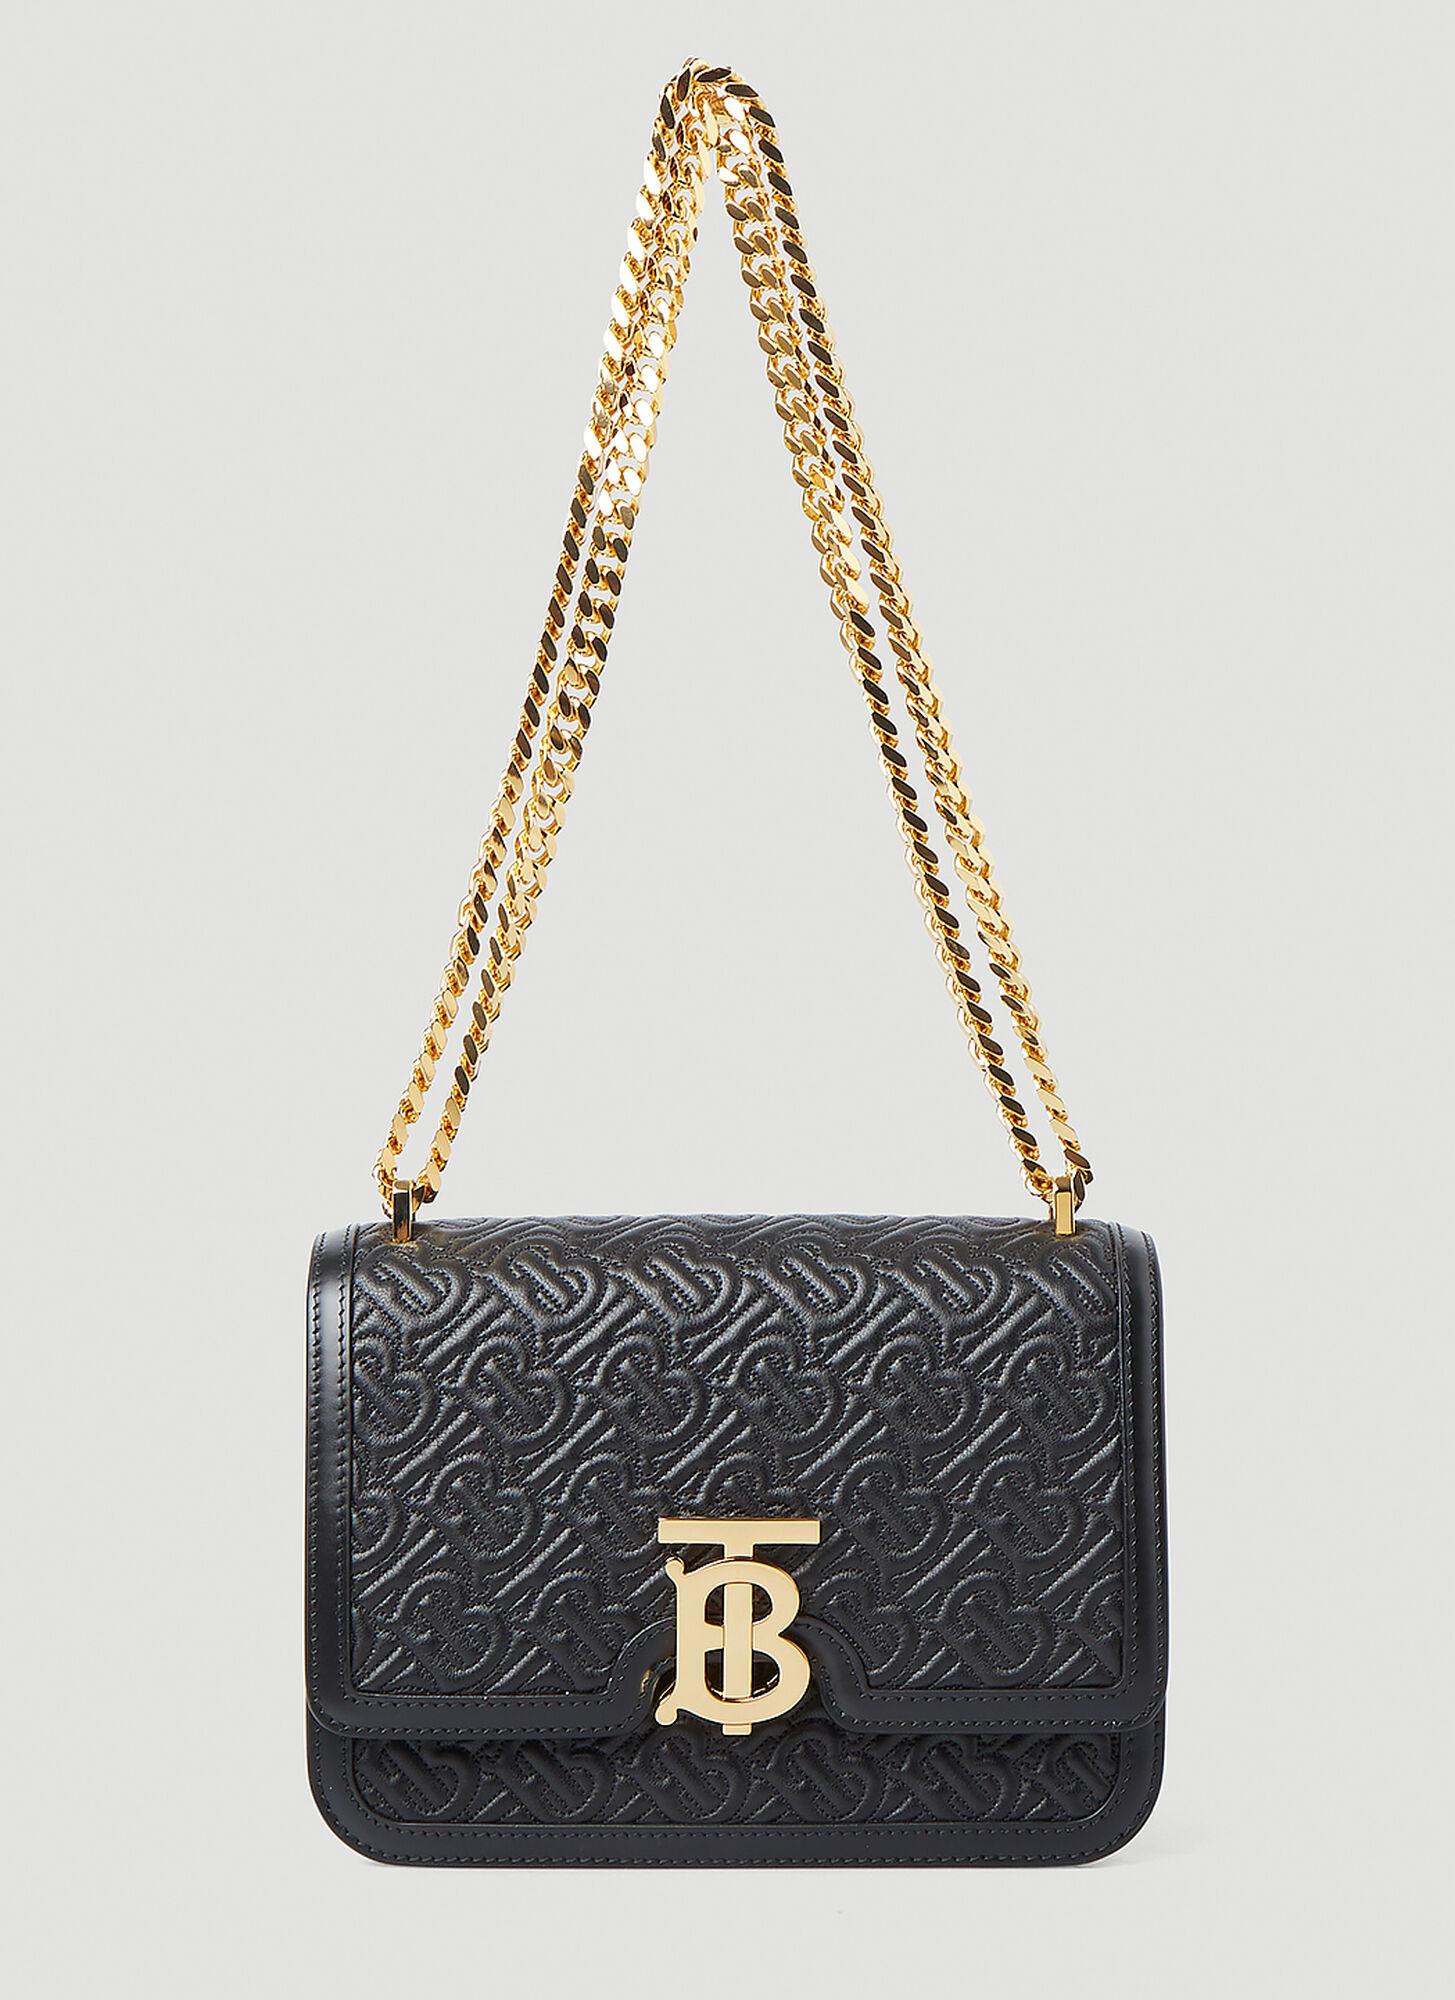 Burberry Tb Monogram Quilted Small Shoulder Bag in Black | Lyst